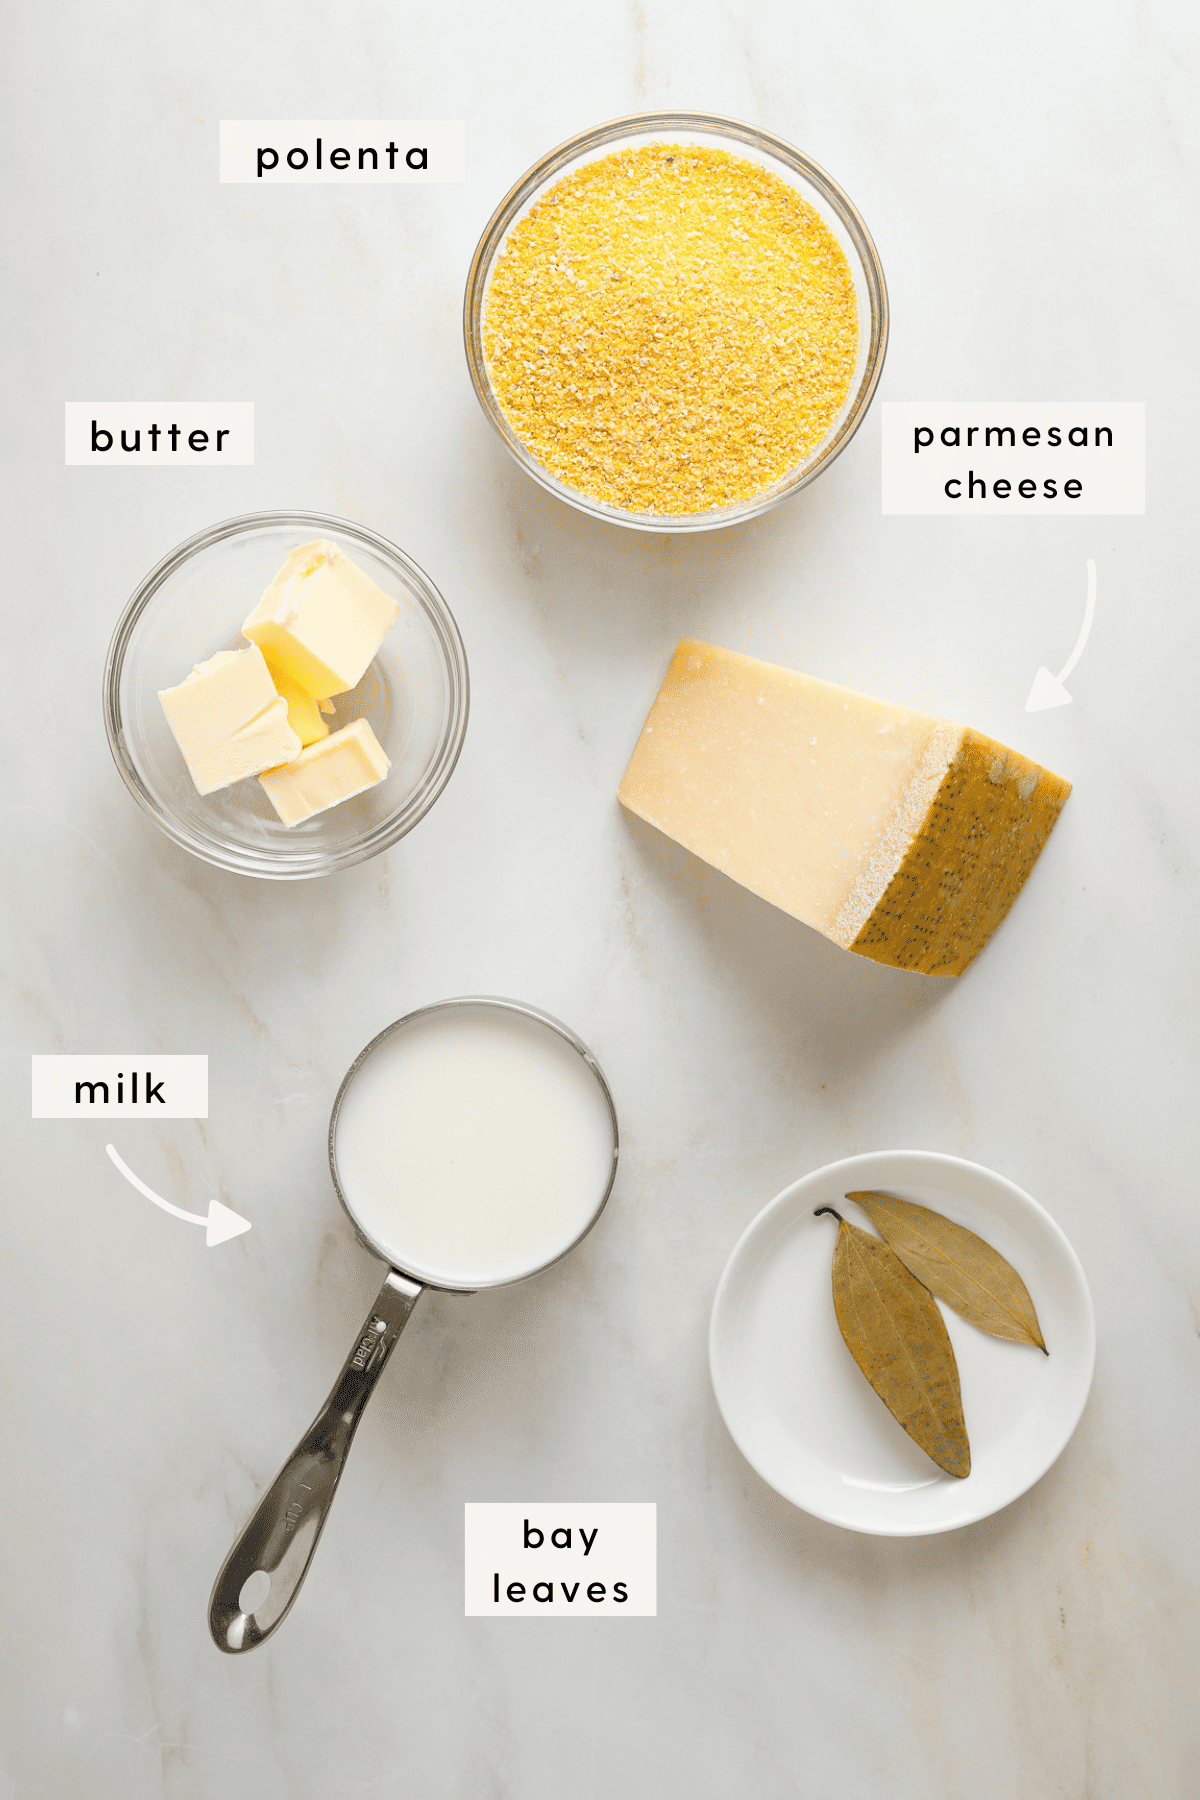 Recipe ingredients individually portioned in small bowls; dried polenta, cubes of butter, a hunk of parmesan cheese, a measuring cup of milk, two bay leaves.